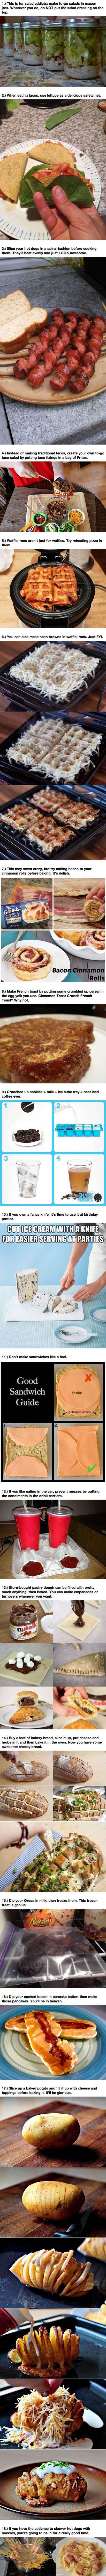 18 life hacks that will make food so much better